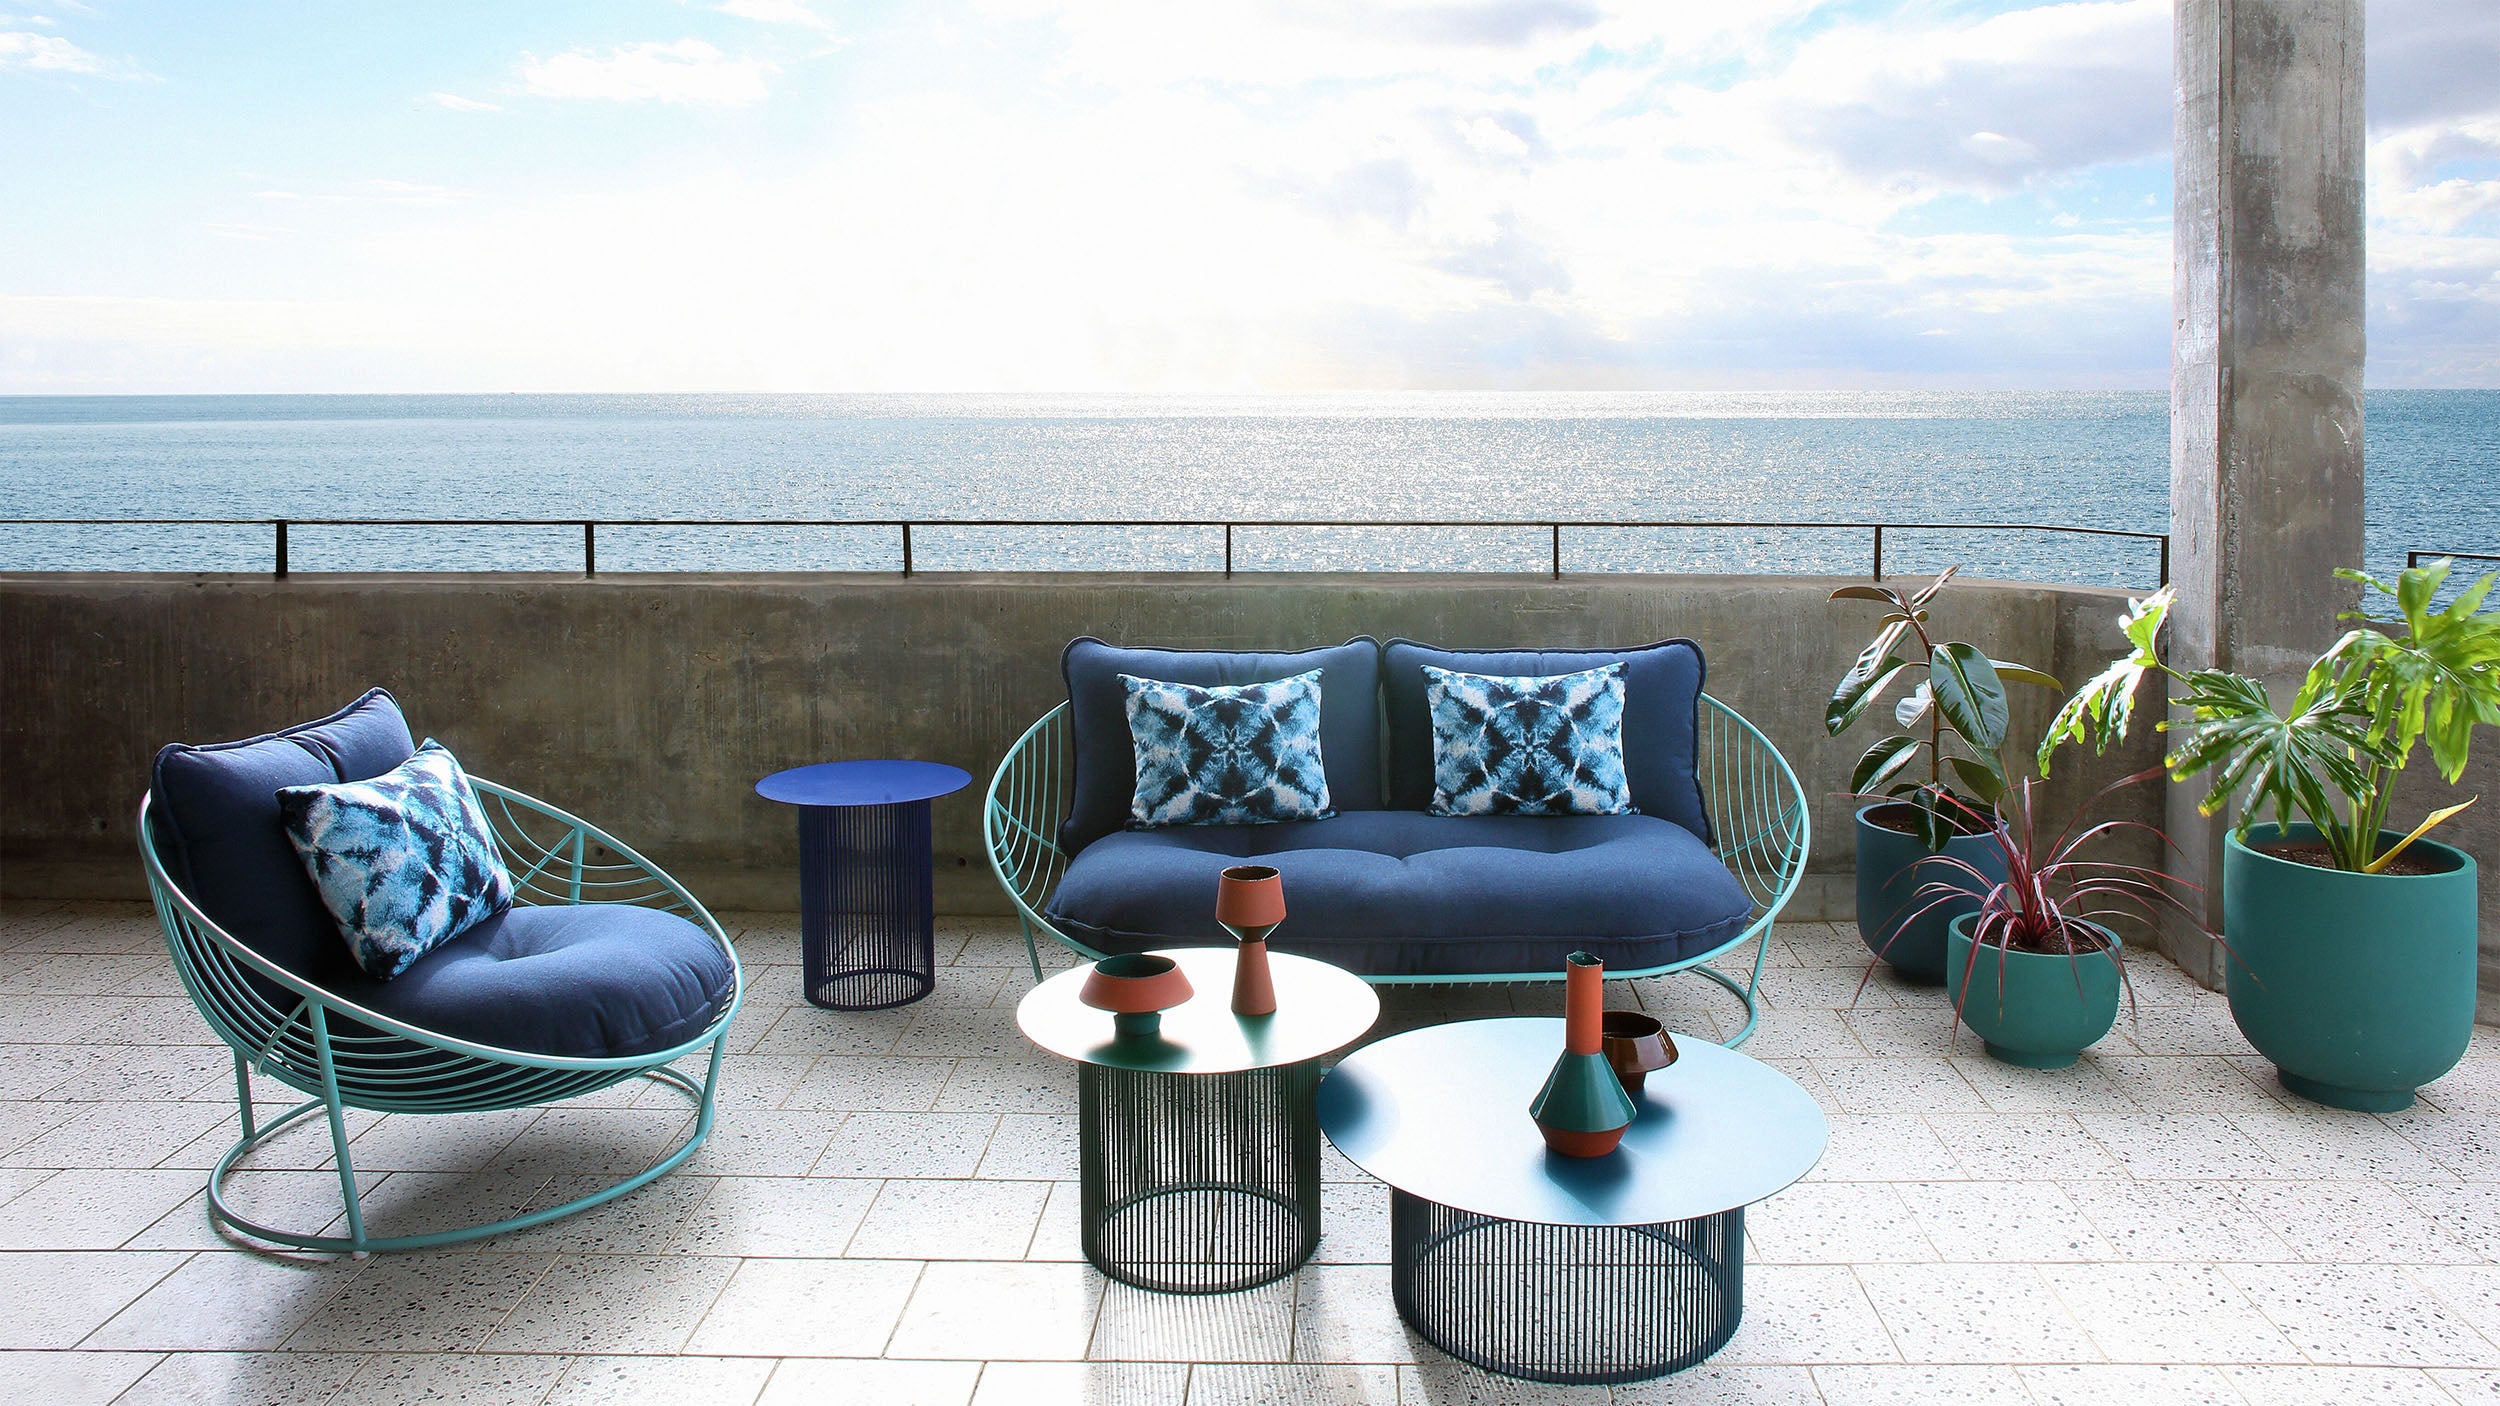 Haldane Martin, outdoor furniture, chairs and coffee tables styled in outdoor setting. Haldane Martin outdoor furniture is available at Sarza home goods and furniture store in Rye New York. 